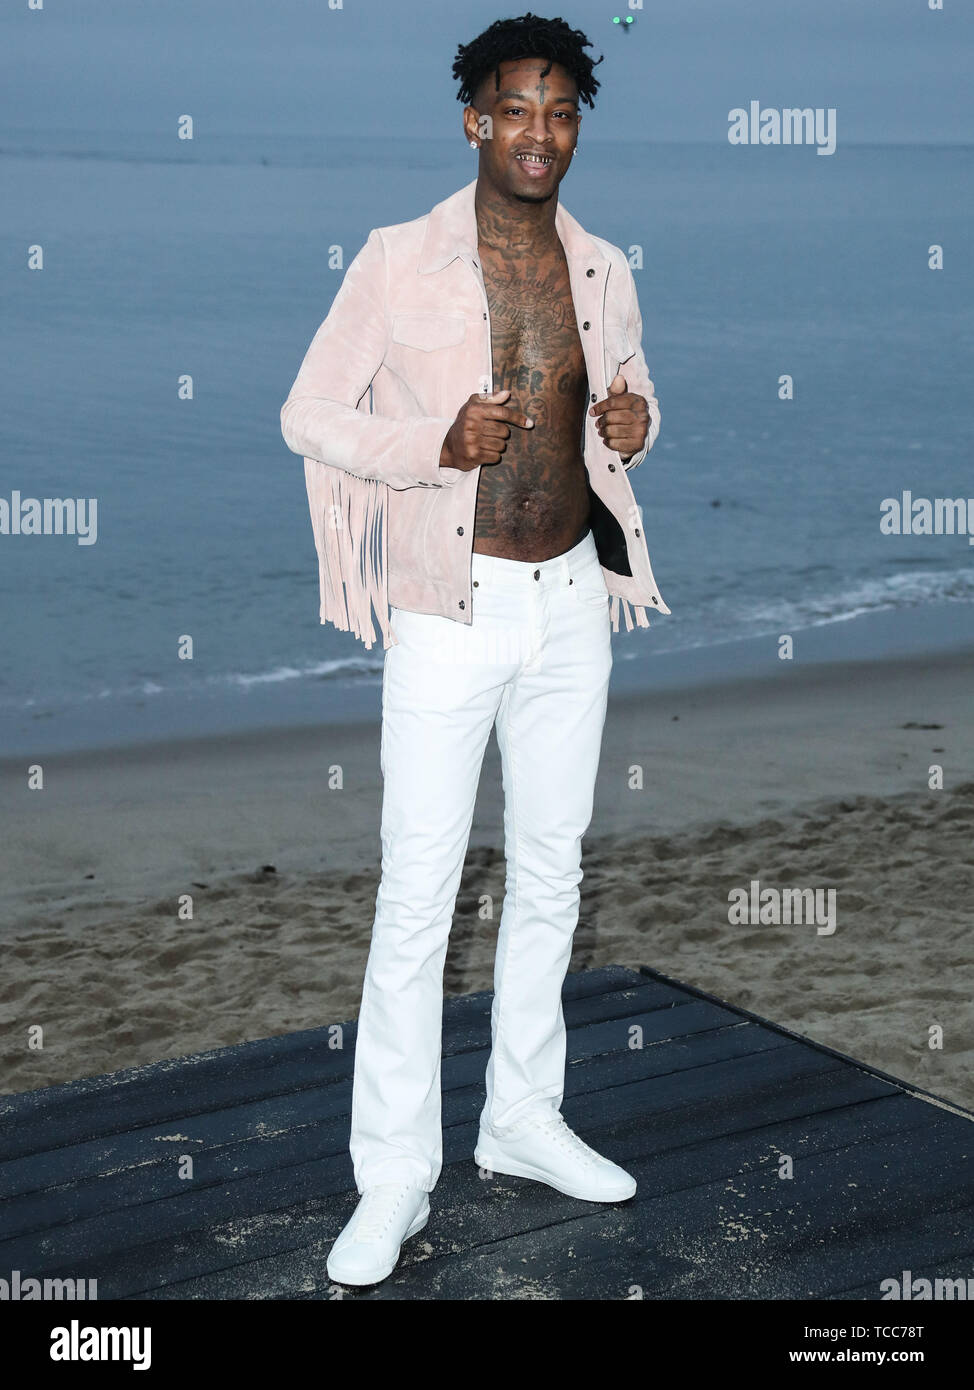 21 Savage Outfit from October 6, 2020, WHAT'S ON THE STAR?